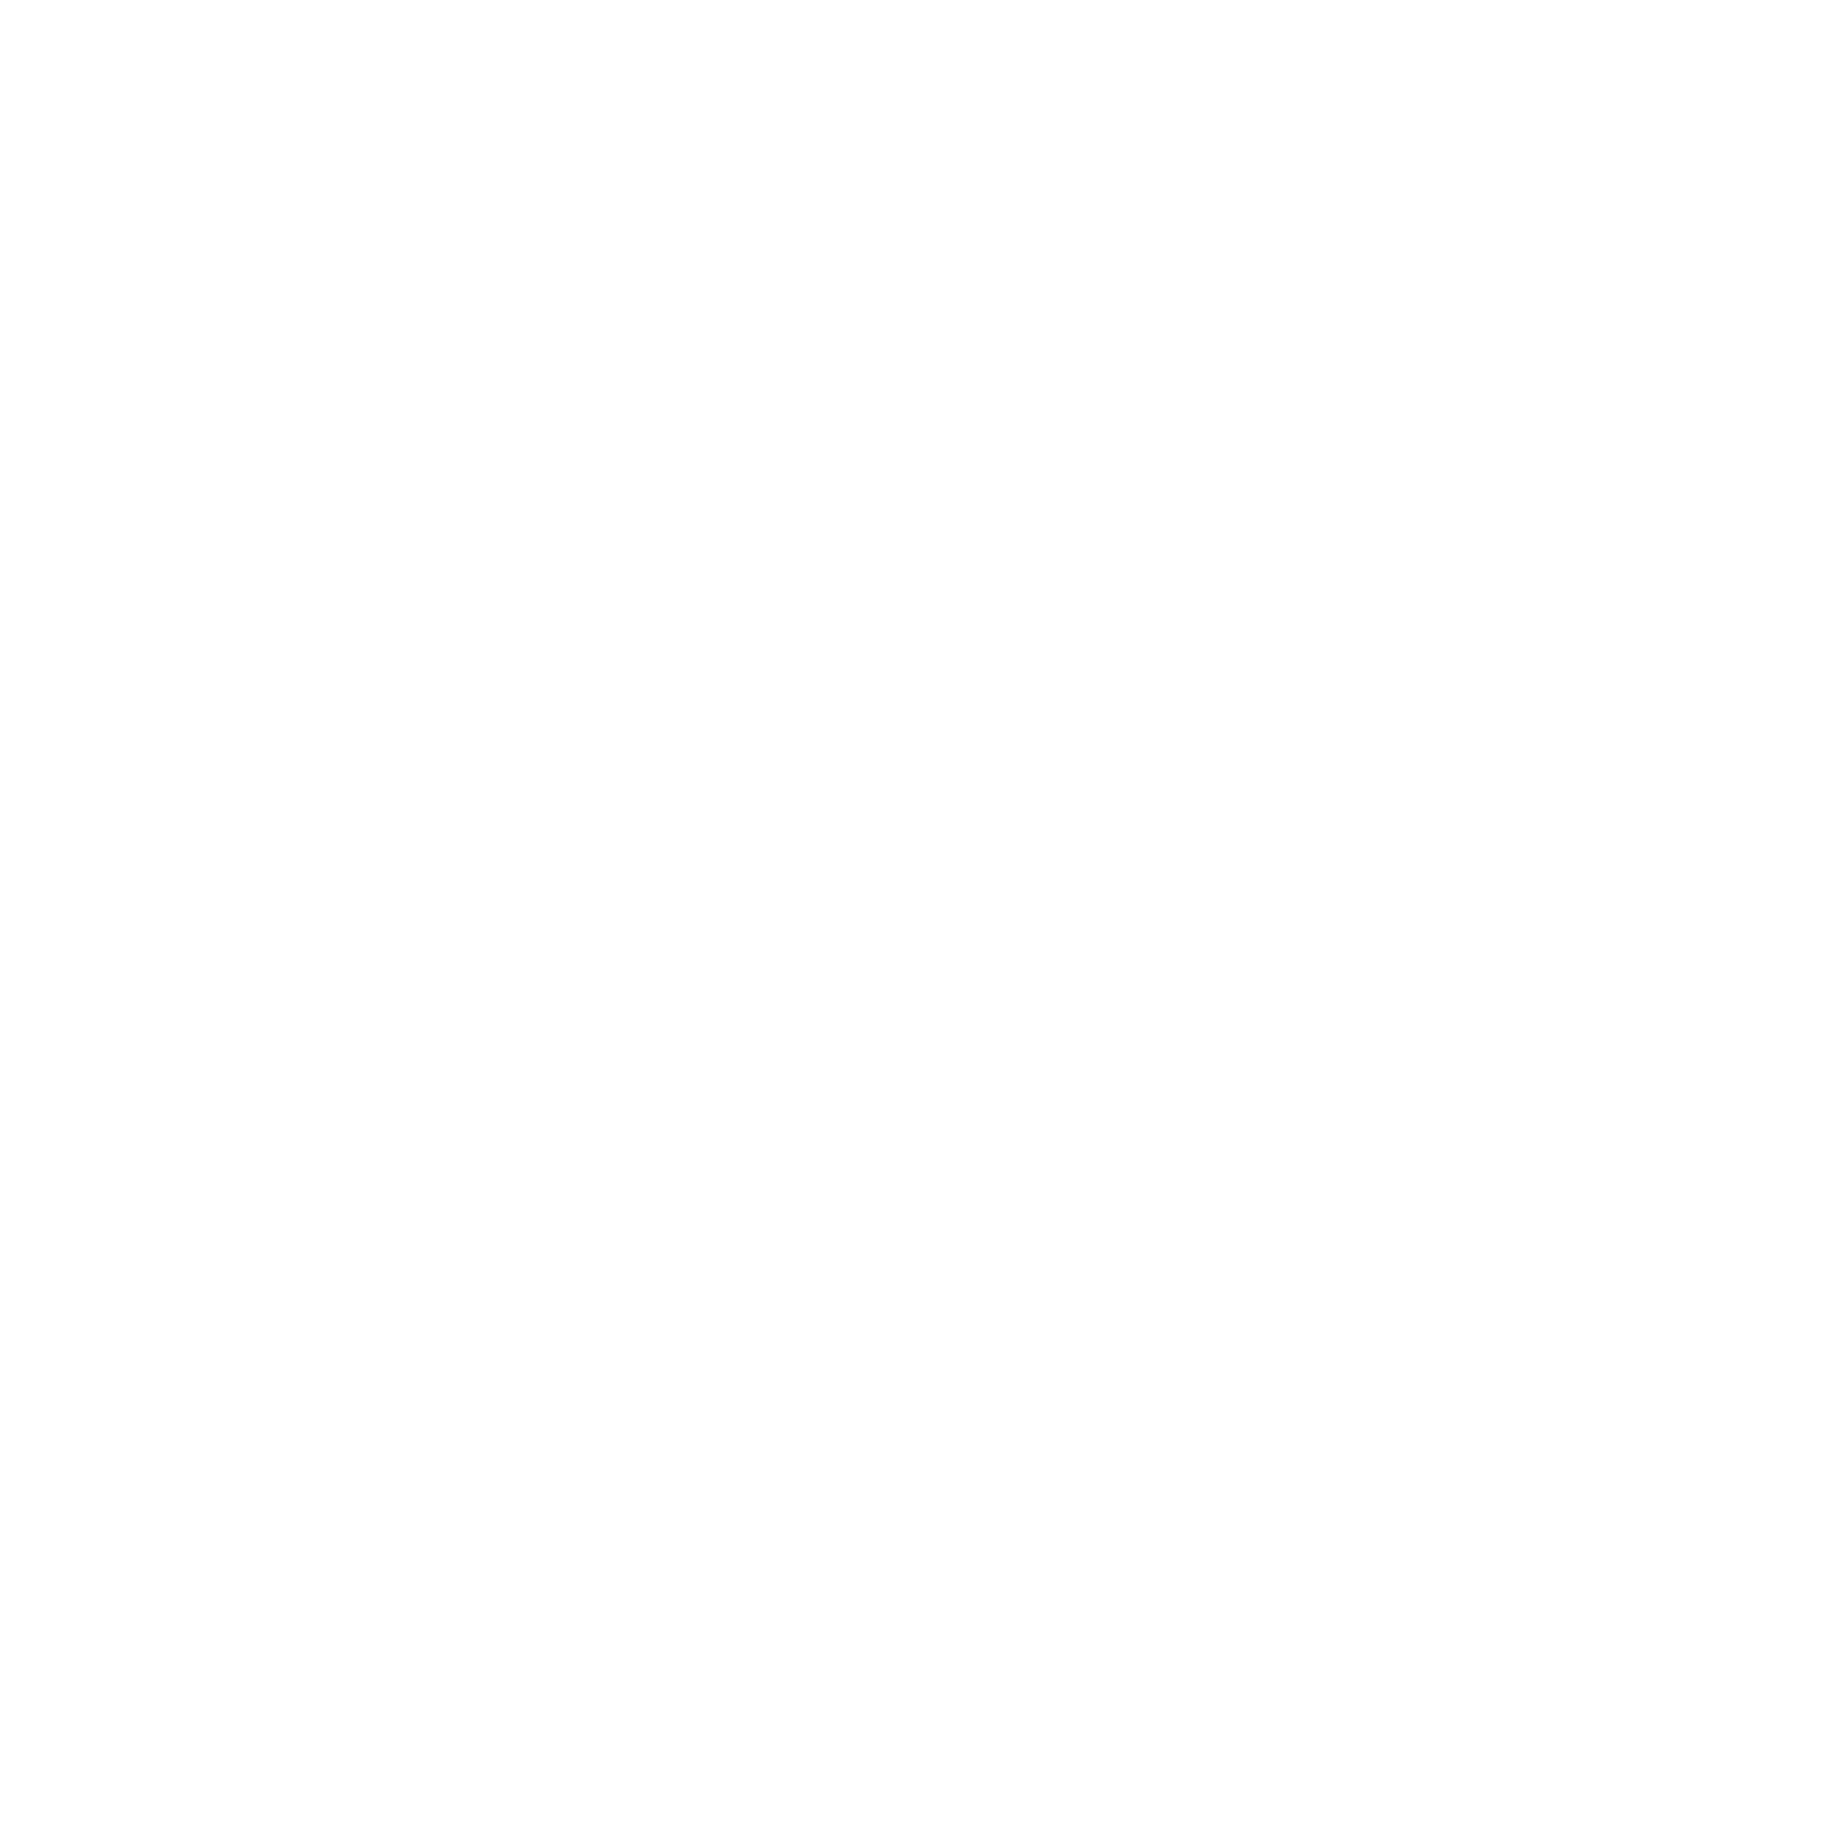 butterfly mark logo for inlight beauty products